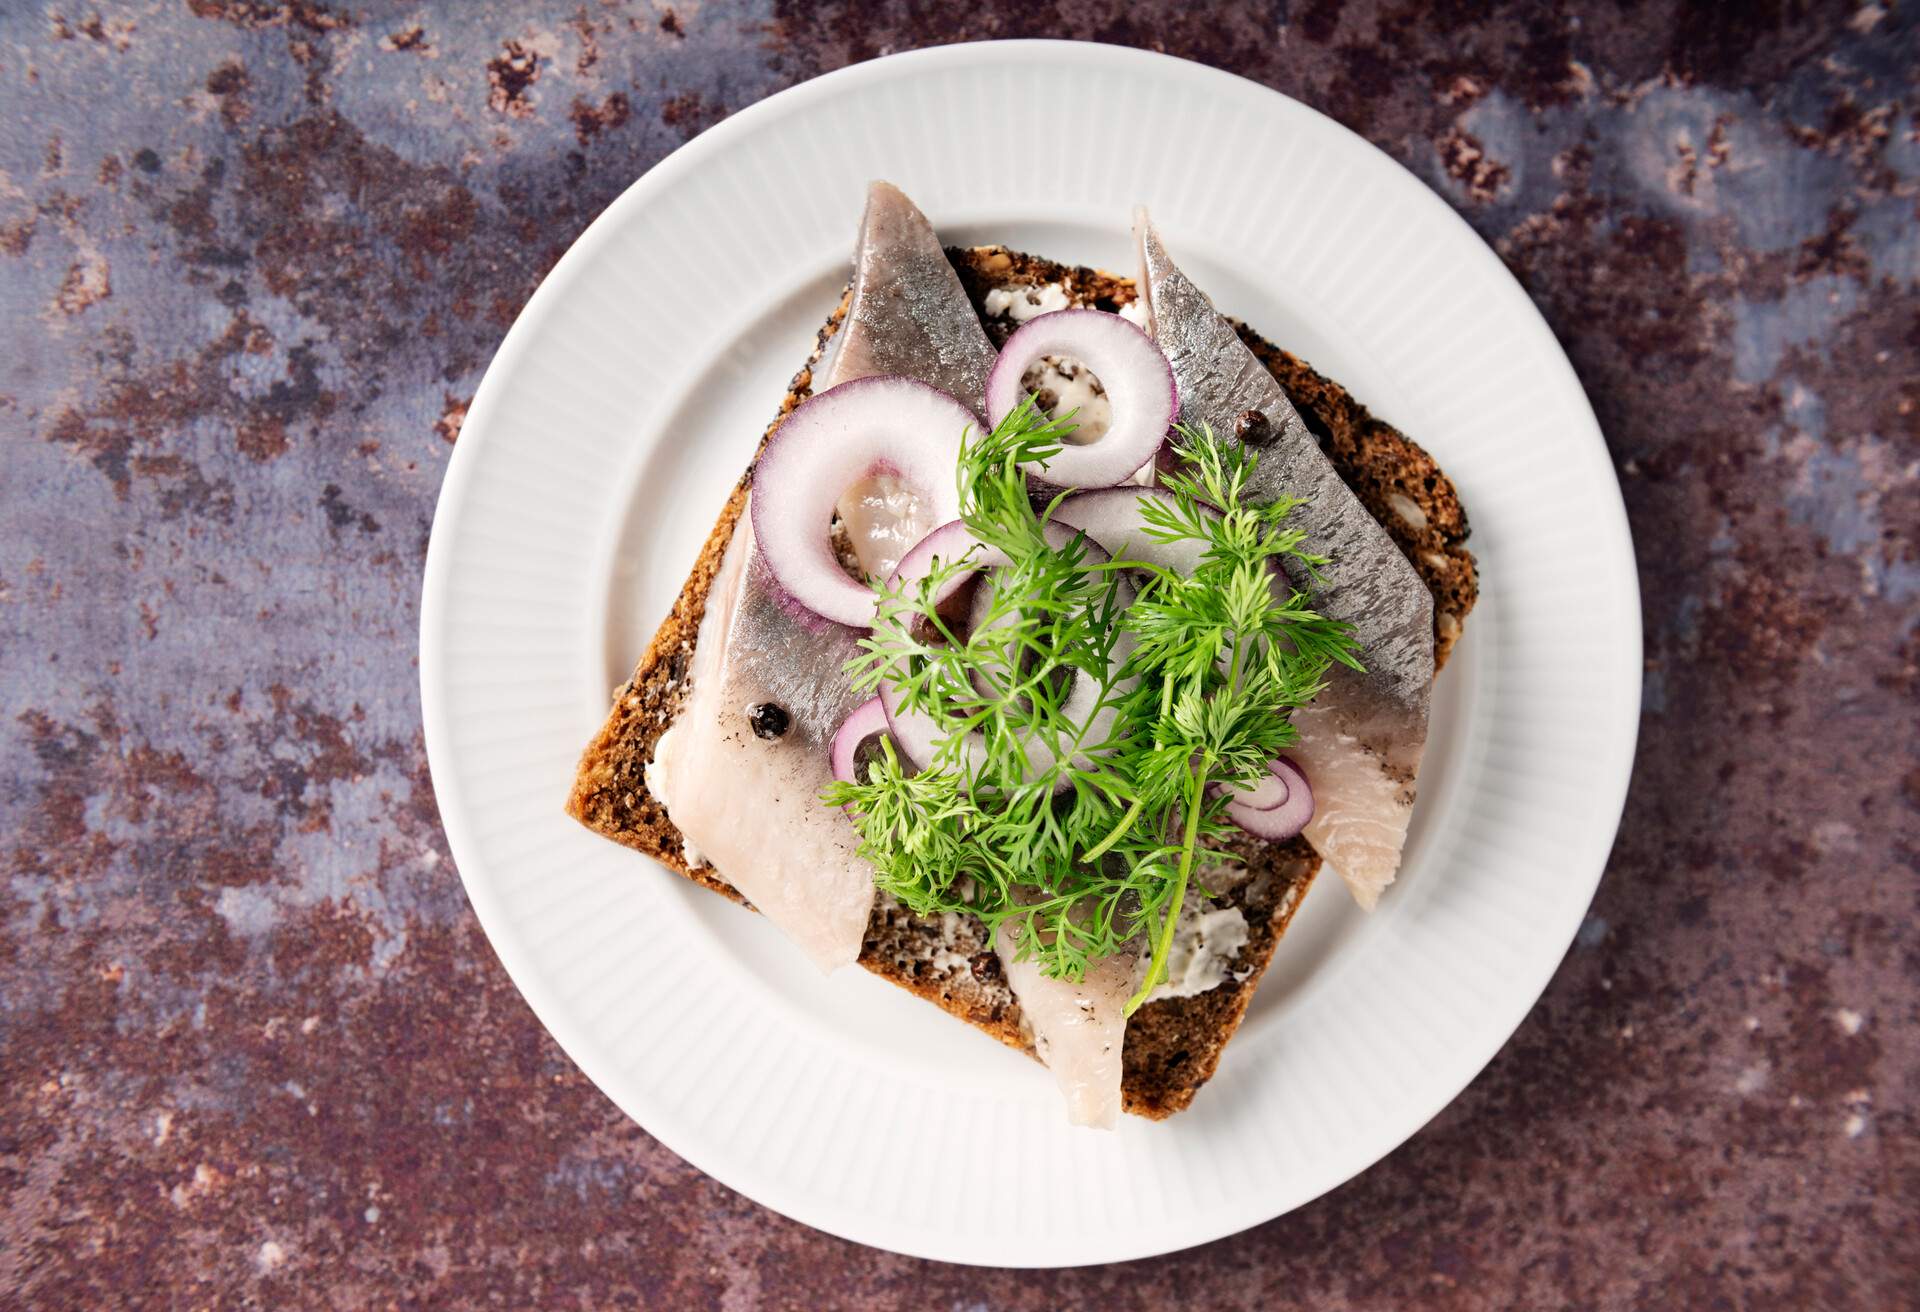 Traditional danish “smørrebrød” or open sandwich made with a slice of buttered rye bread, marinated herring, onion and dill. Colour, horizontal with some copy space.